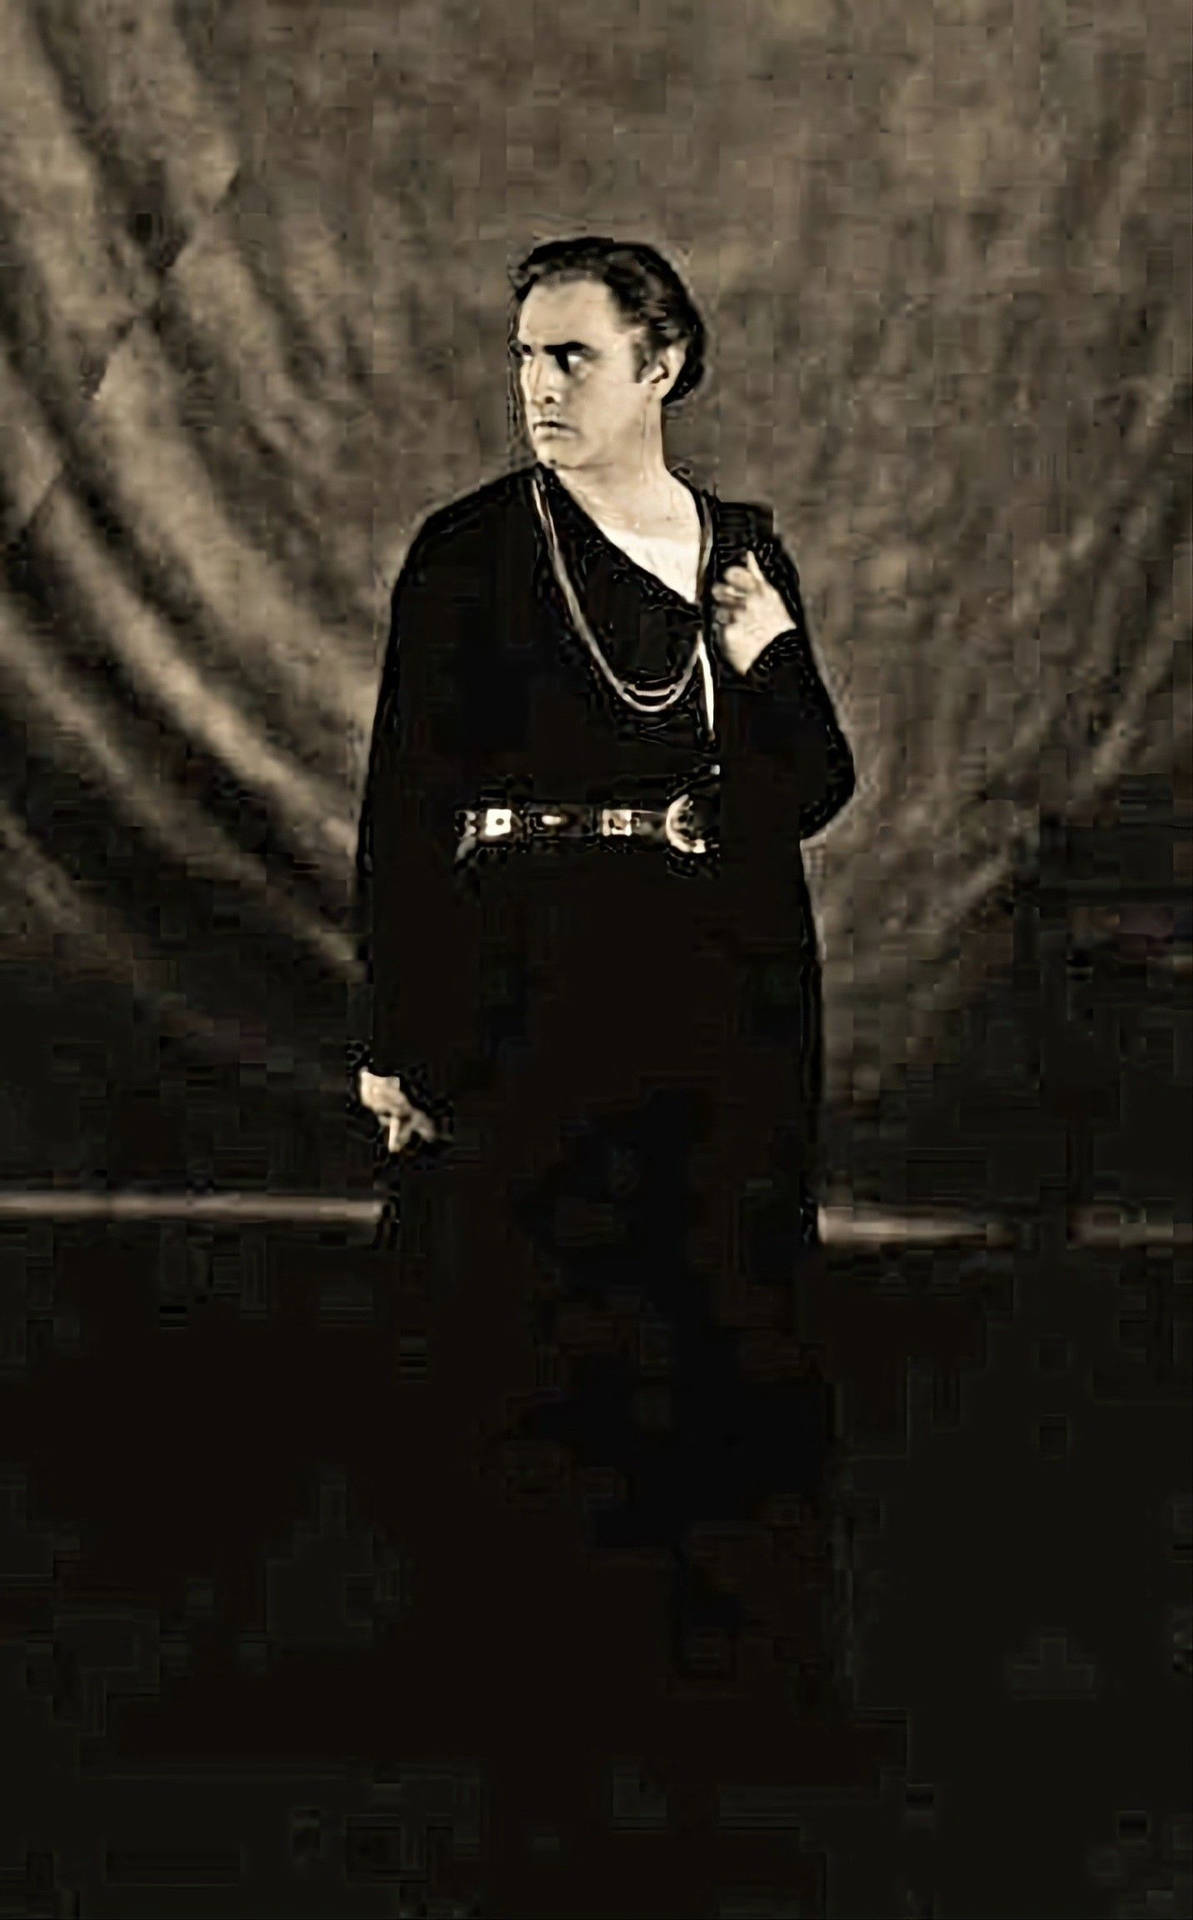 John Barrymore As Hamlet In Classic Black And White Image